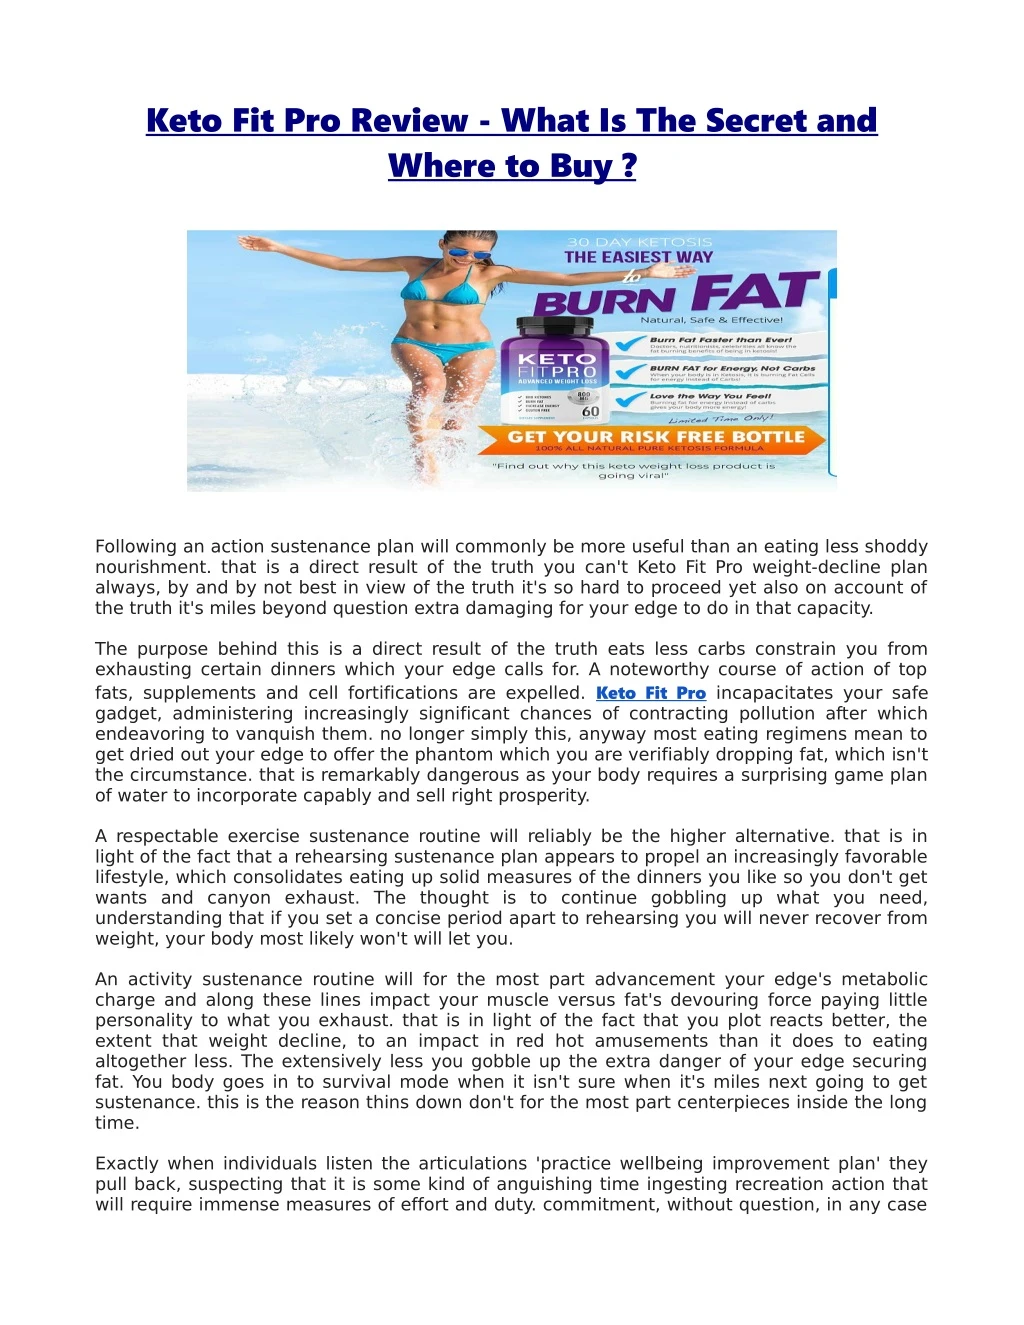 keto fit pro review what is the secret and where